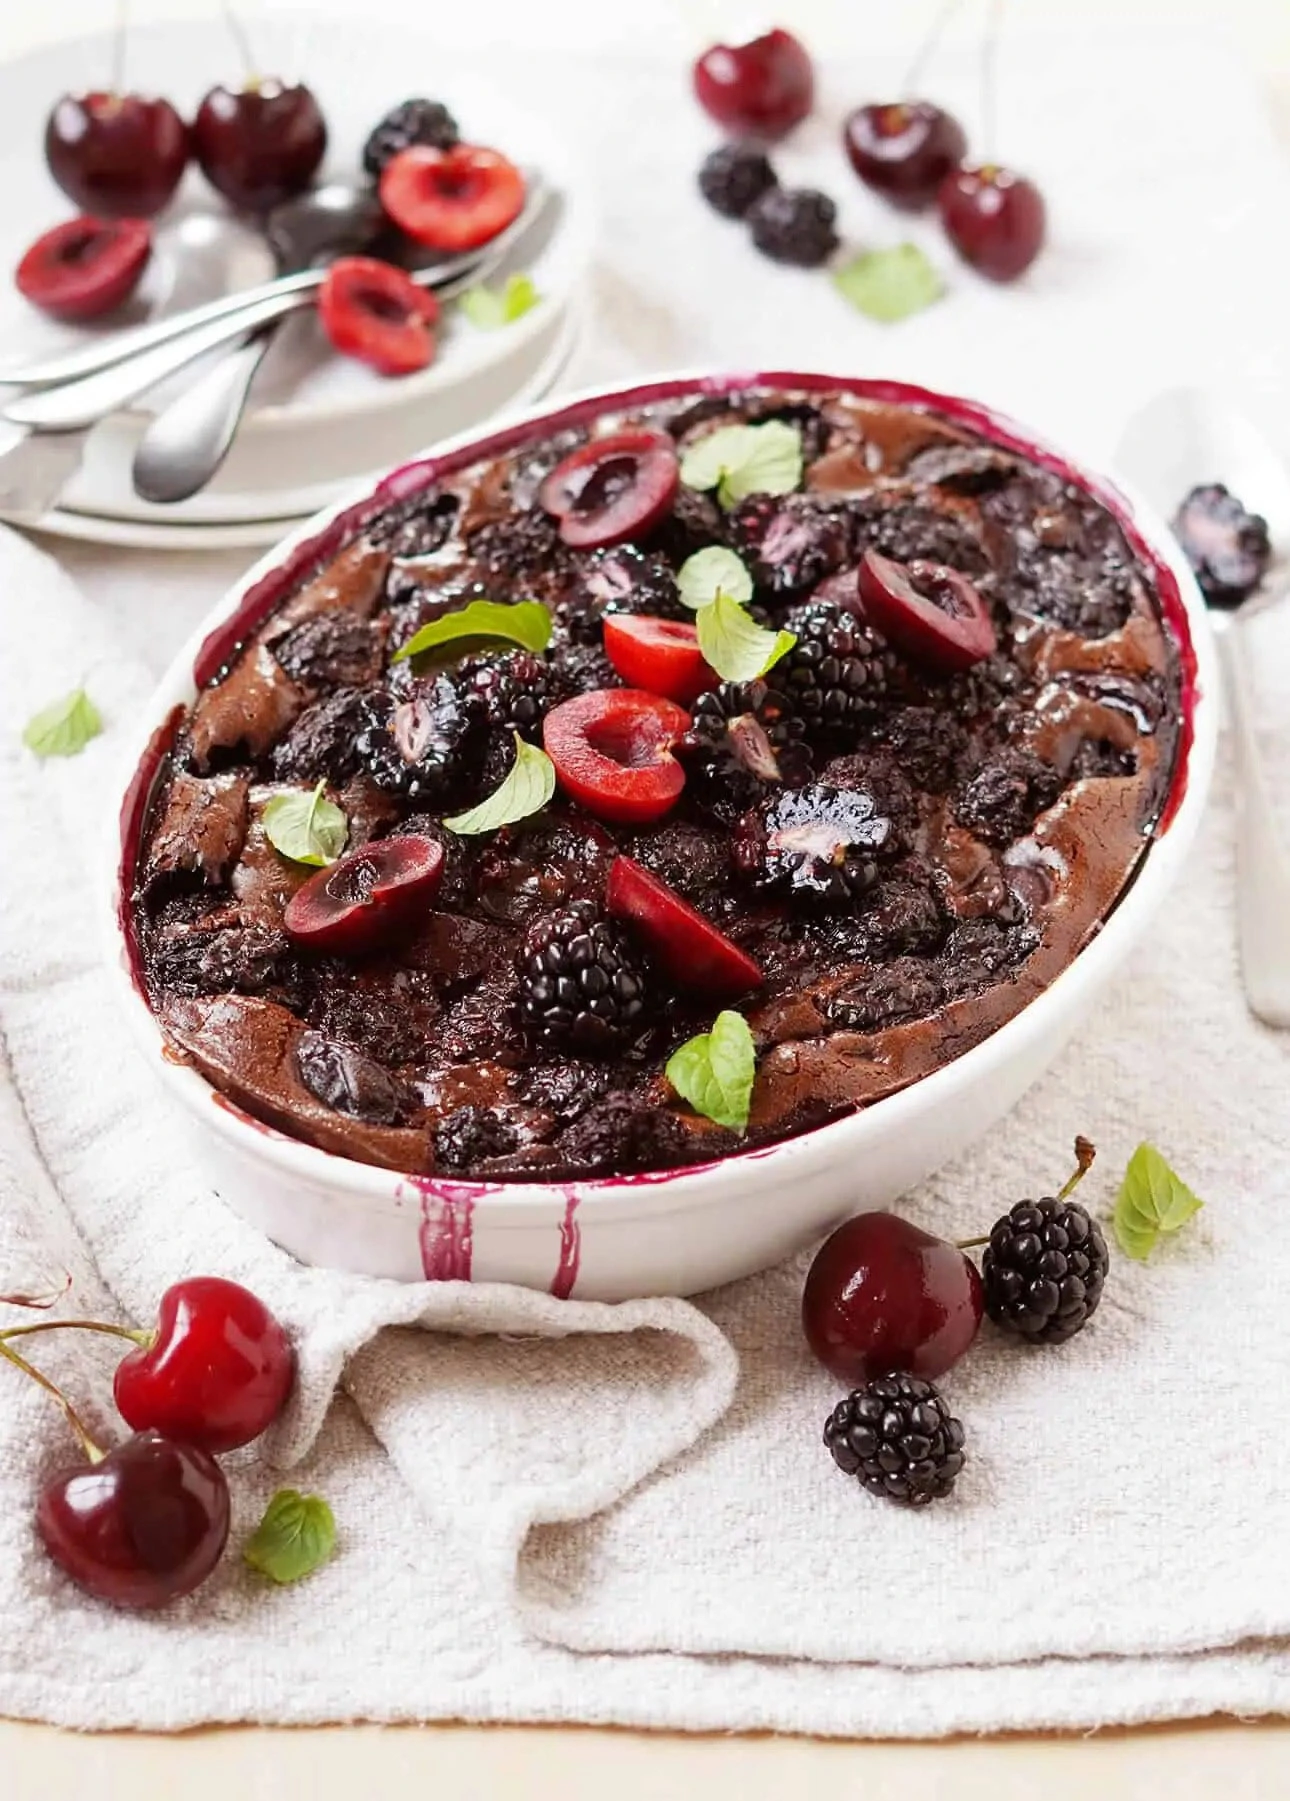 Blackberry, Cherry, and Chocolate Clafoutis by Food Nouveau